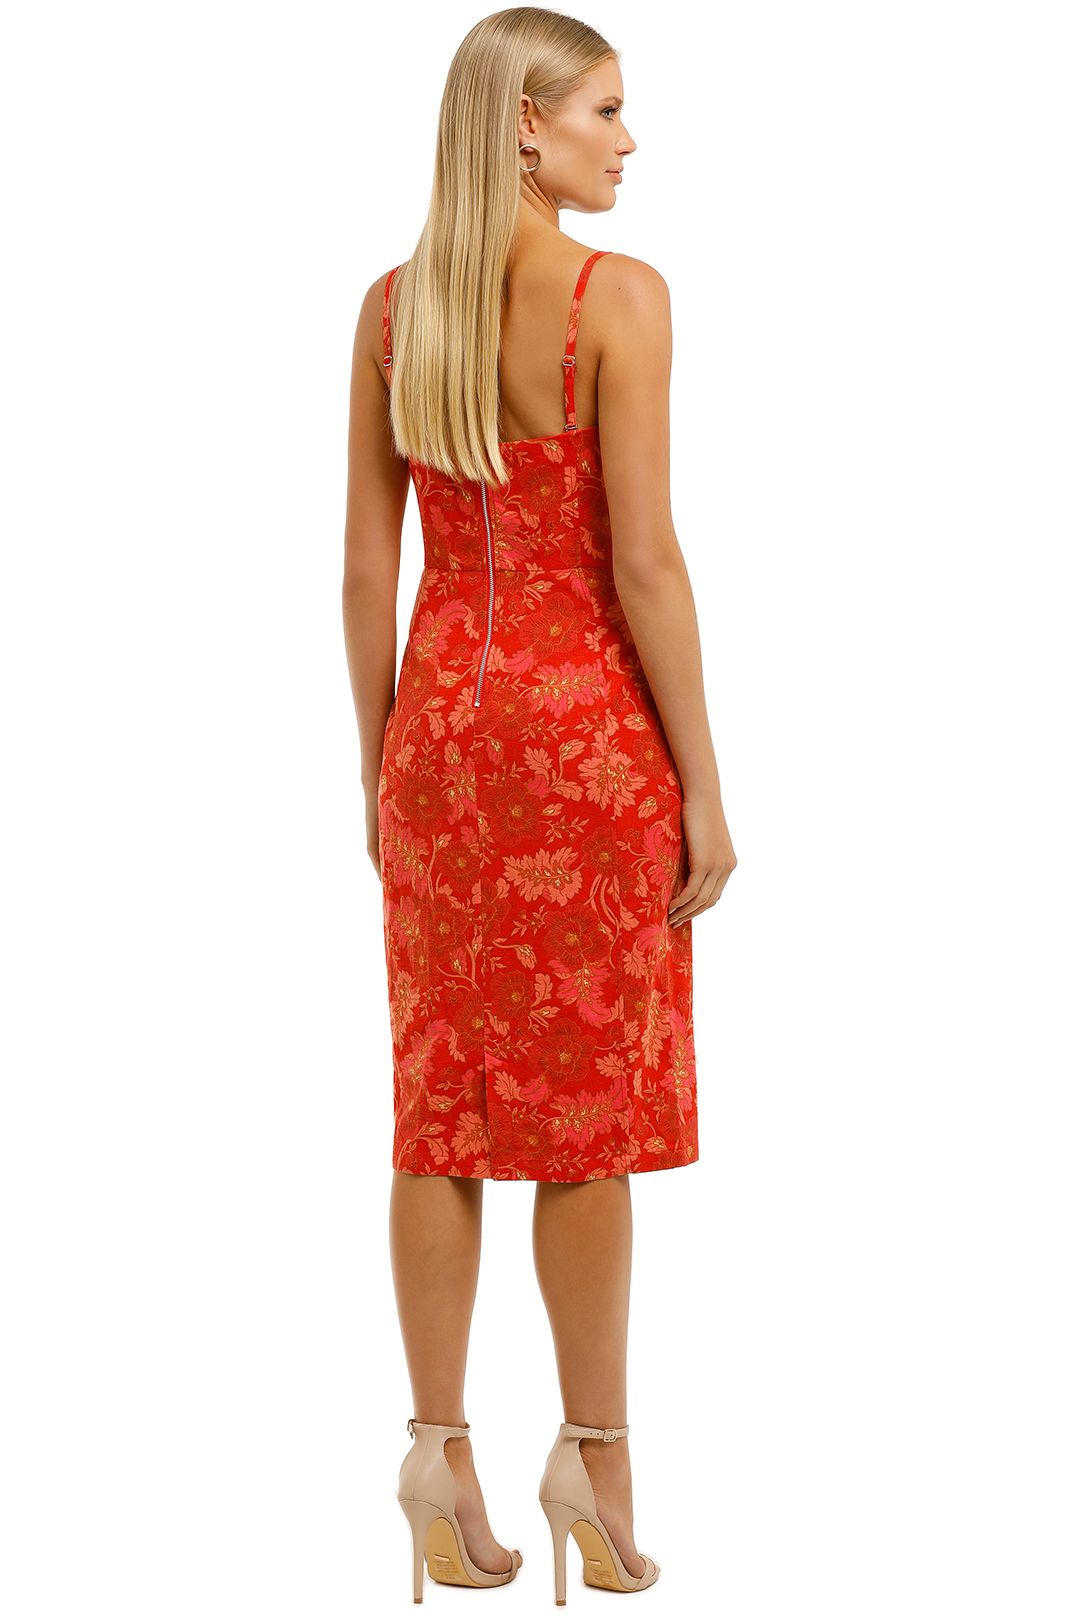 Ministry-of-Style-Hibiscus-Strapless-Dress-Print-Back